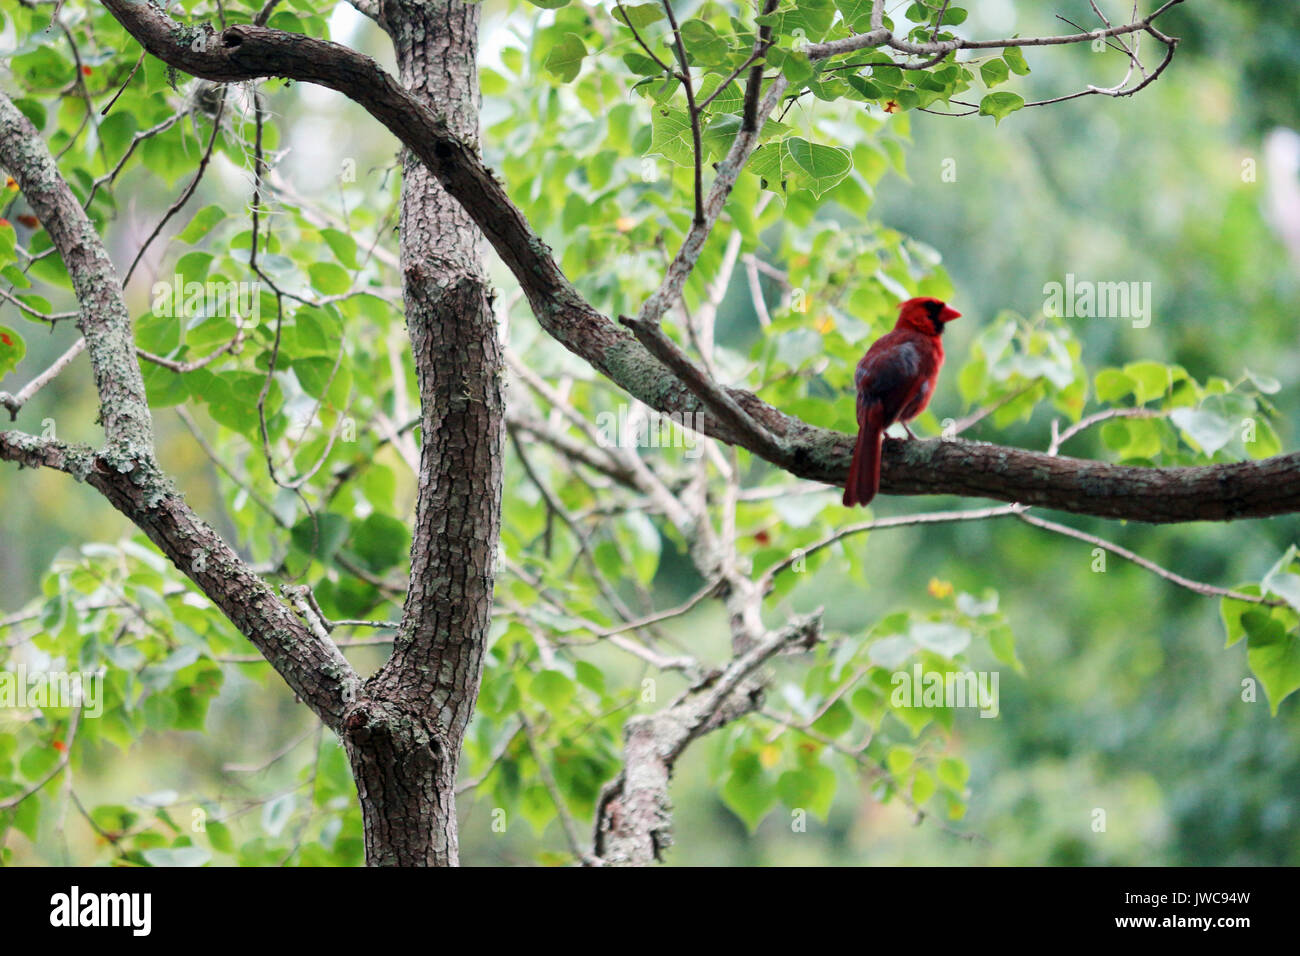 A red Cardinal perched on a tree branch. Stock Photo